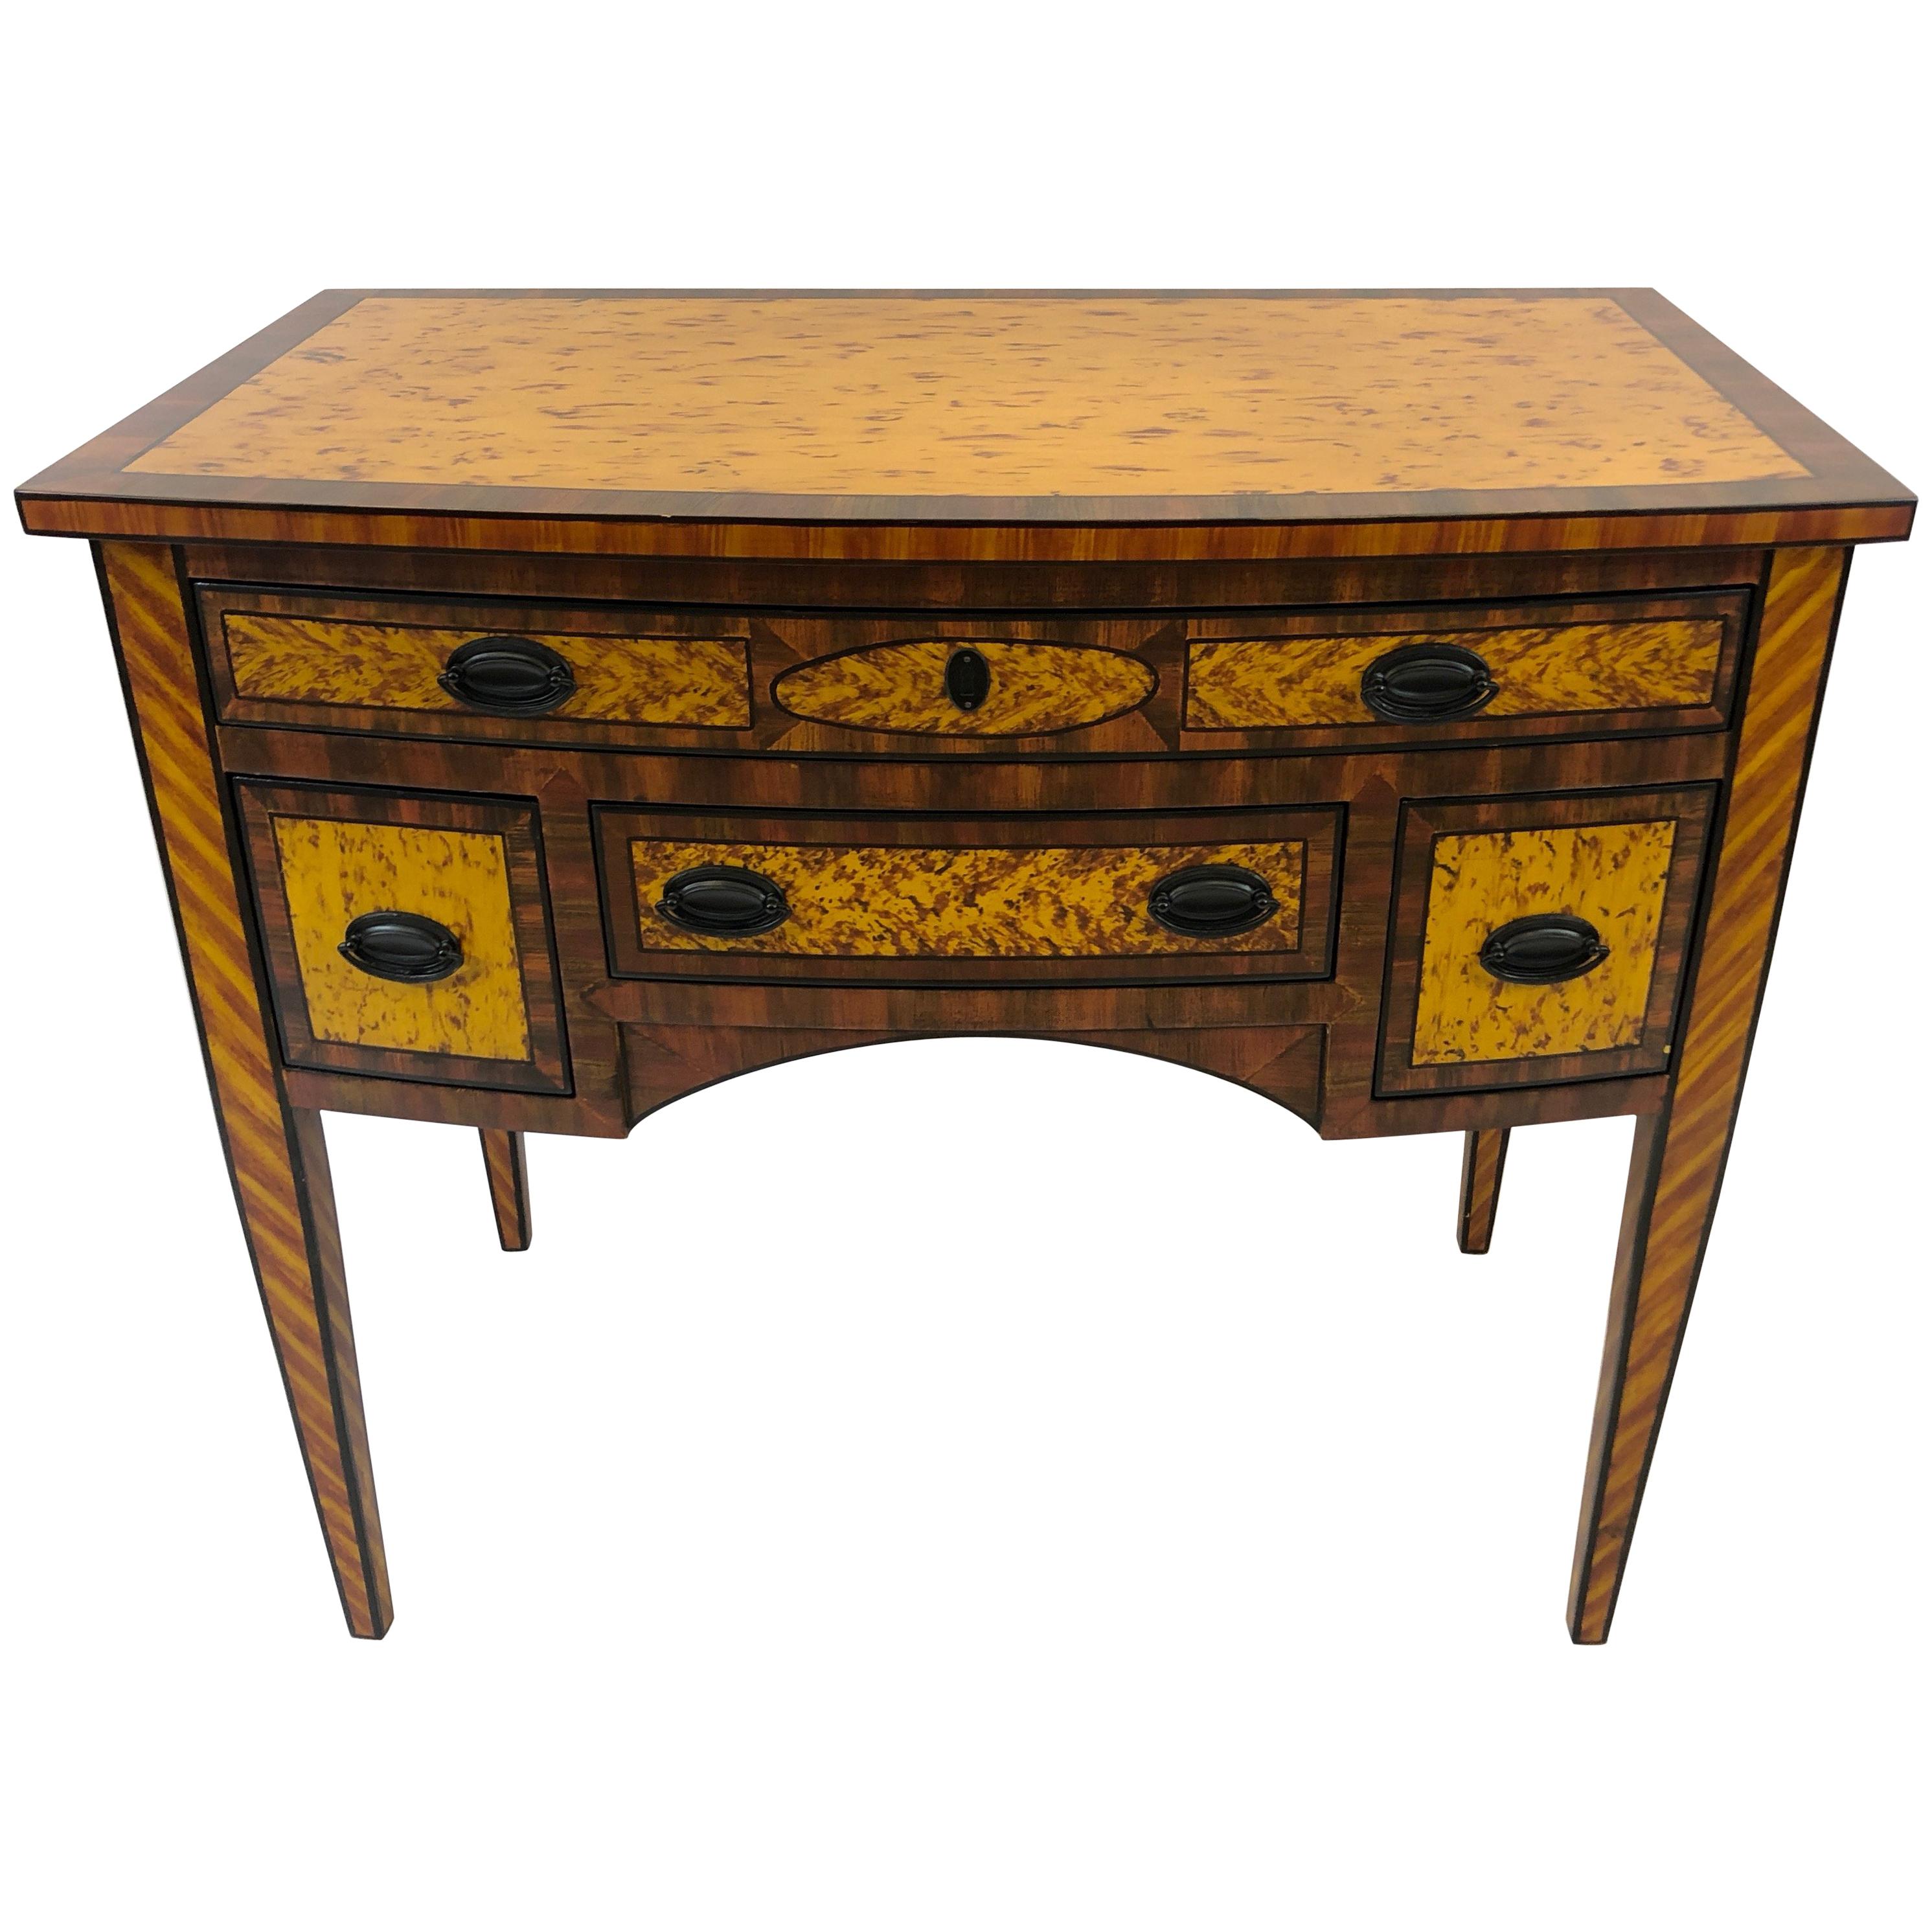 Wonderfully Decorative Grain Painted Lowboy Chest by Harden For Sale